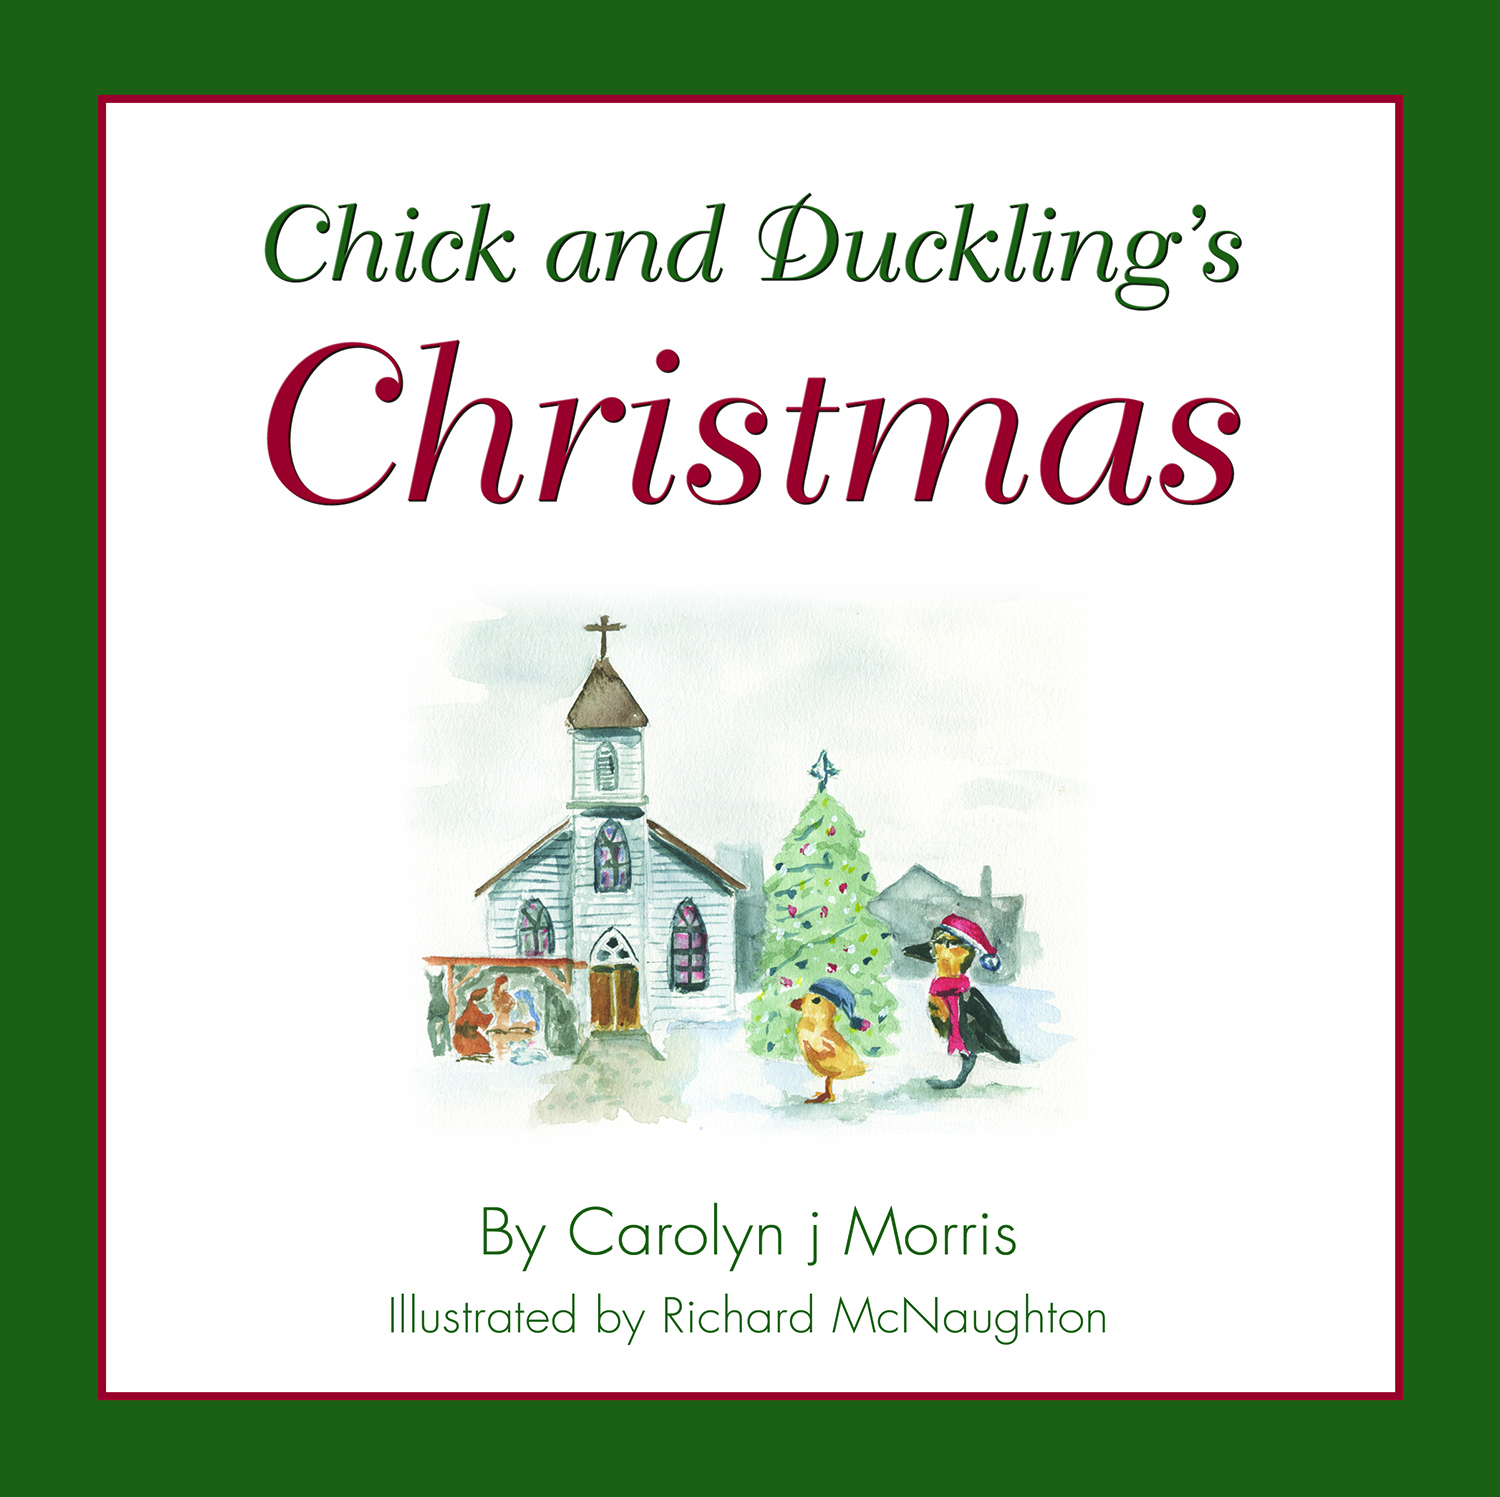 Chick & Duckling's Christmas